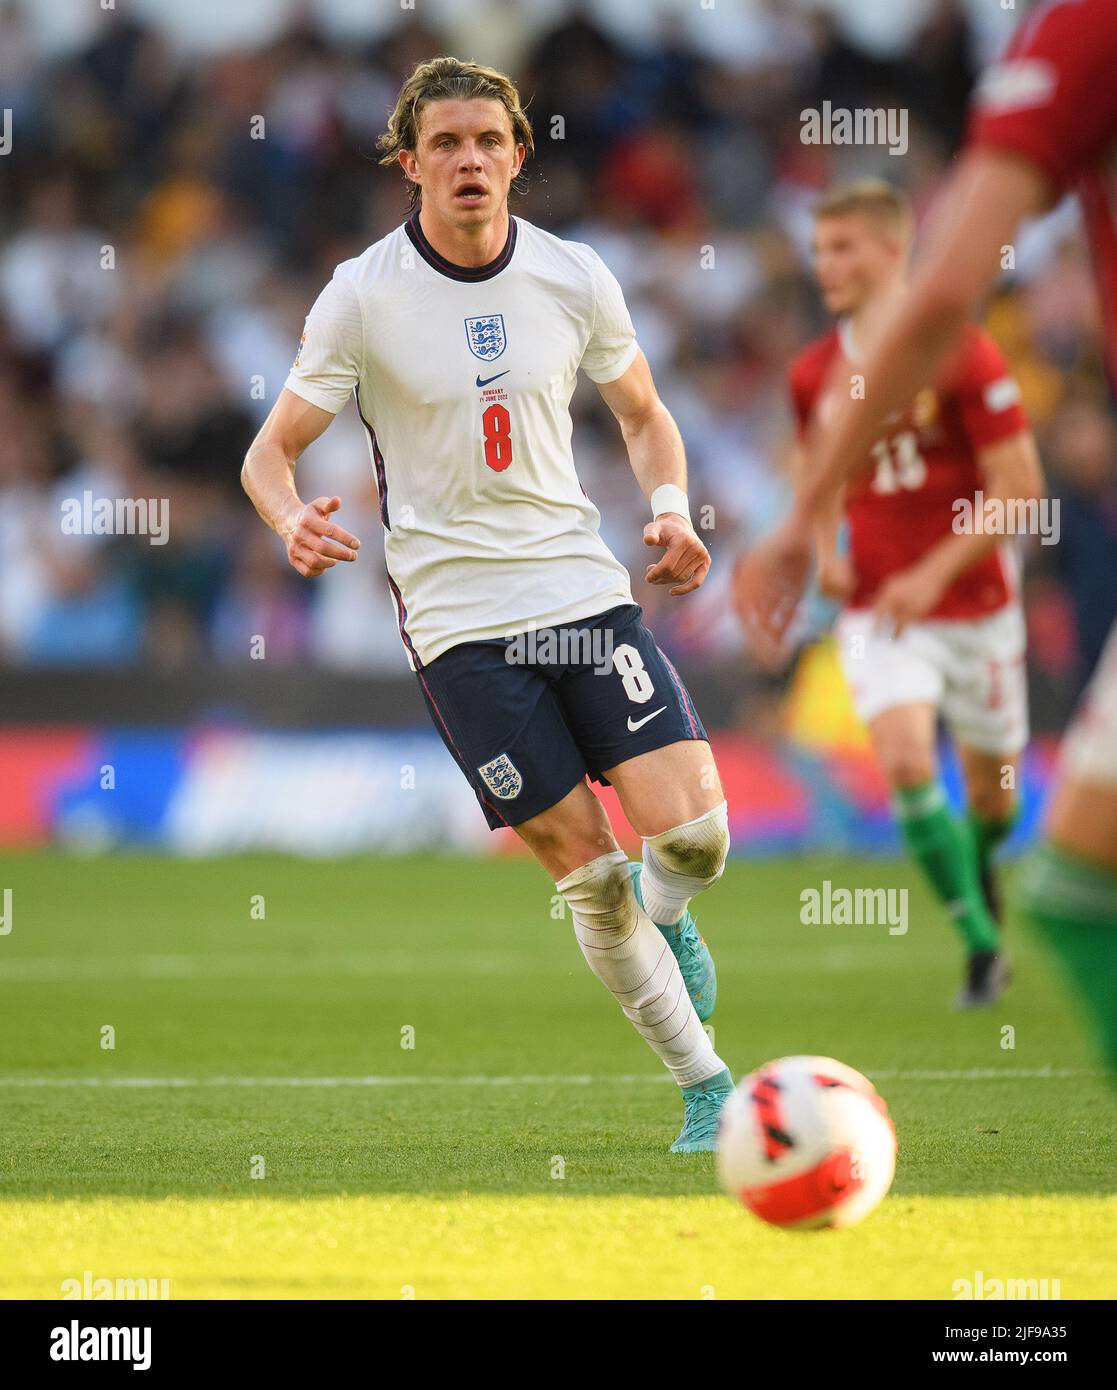 England v Hungary - UEFA Nations League. 14/6/22 Conor Gallagher during the Nations League match against Hungary. Pic : Mark Pain / Alamy Stock Photo